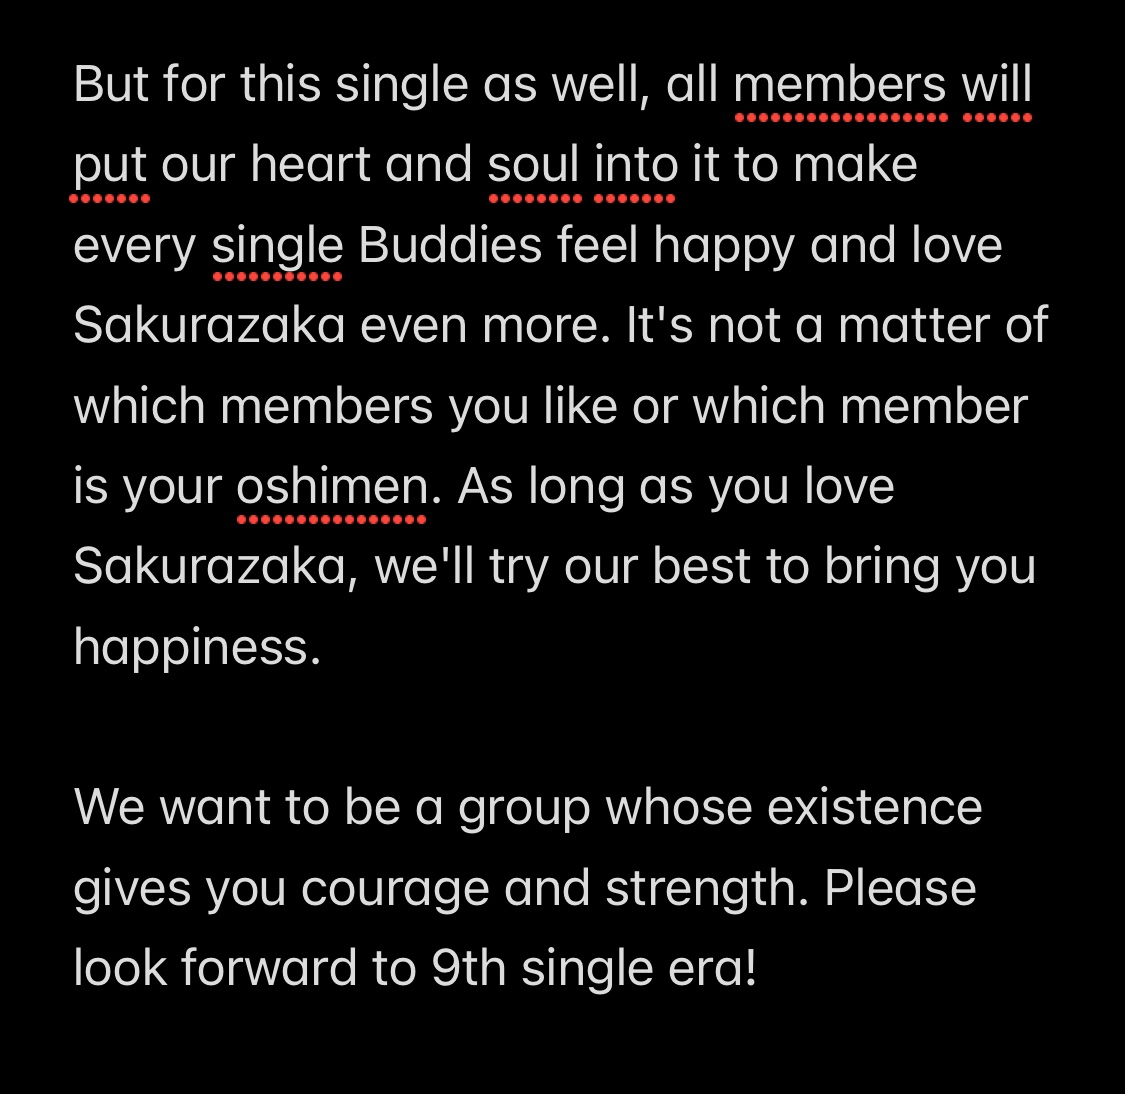 Hono's message to buddies on talk, quick translation.

T/n: The members love you even if they're not your oshi. So I hope Buddies will be thoughtful to all members in return 🥹